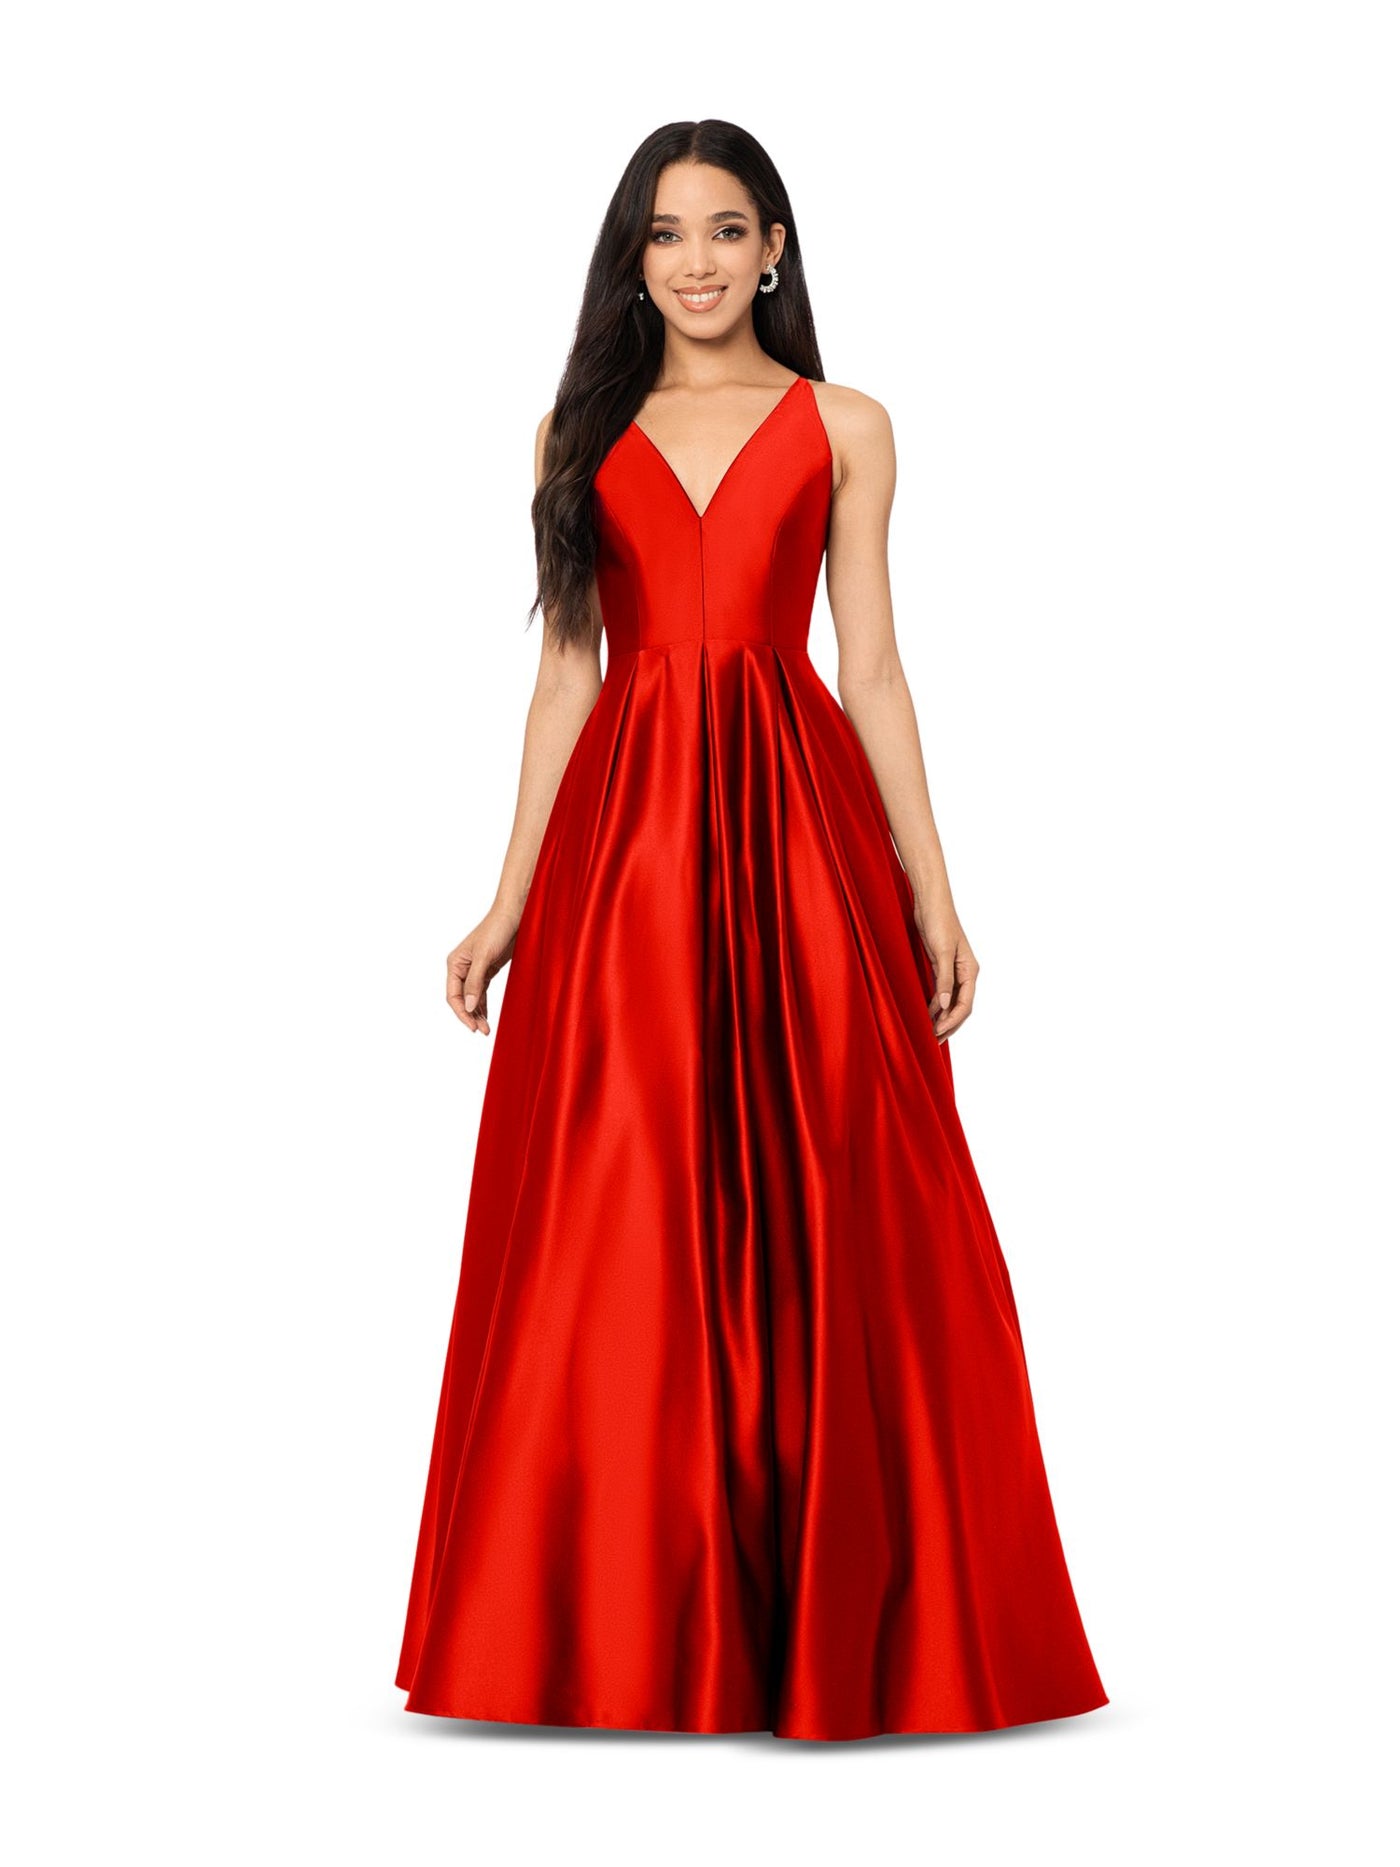 BLONDIE Womens Red Zippered Pocketed Pleated Lined Tie Back Cutout Spaghetti Strap V Neck Full-Length Formal Gown Dress Juniors 1